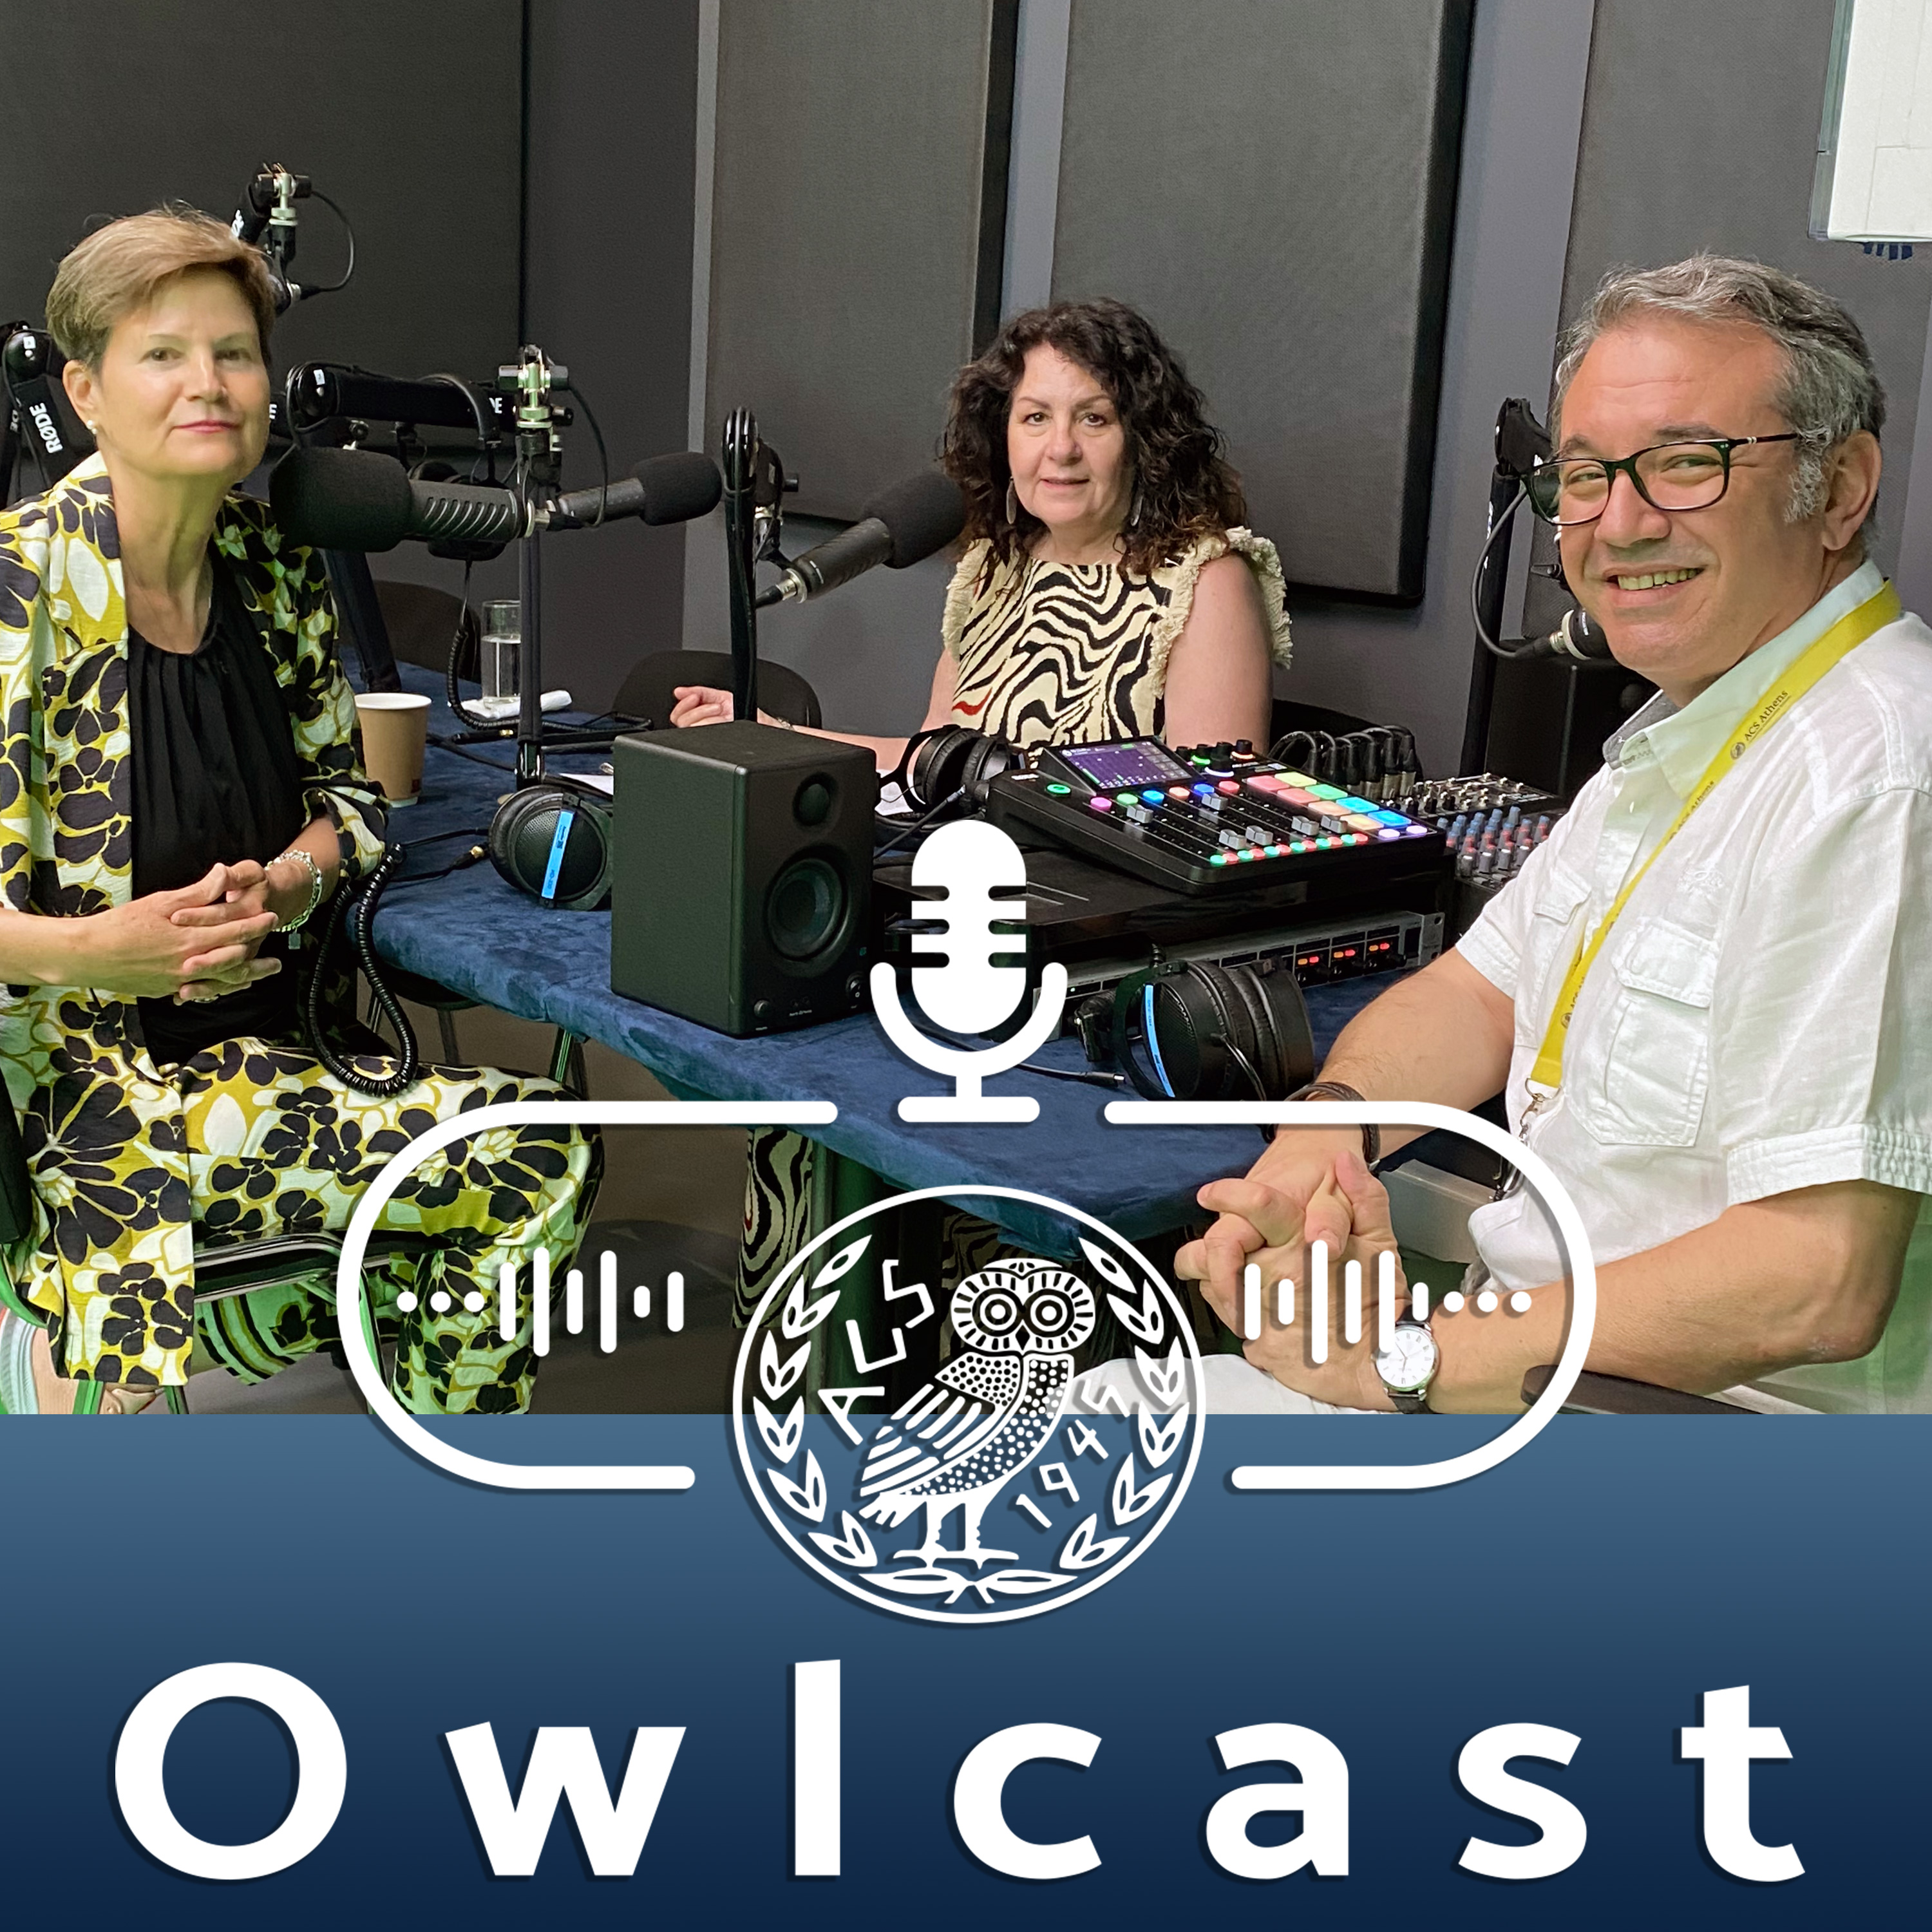 Owlcast 98 - President's Edition w/Nancy Snow • Reflections on diplomacy and cultural connections as a global citizen